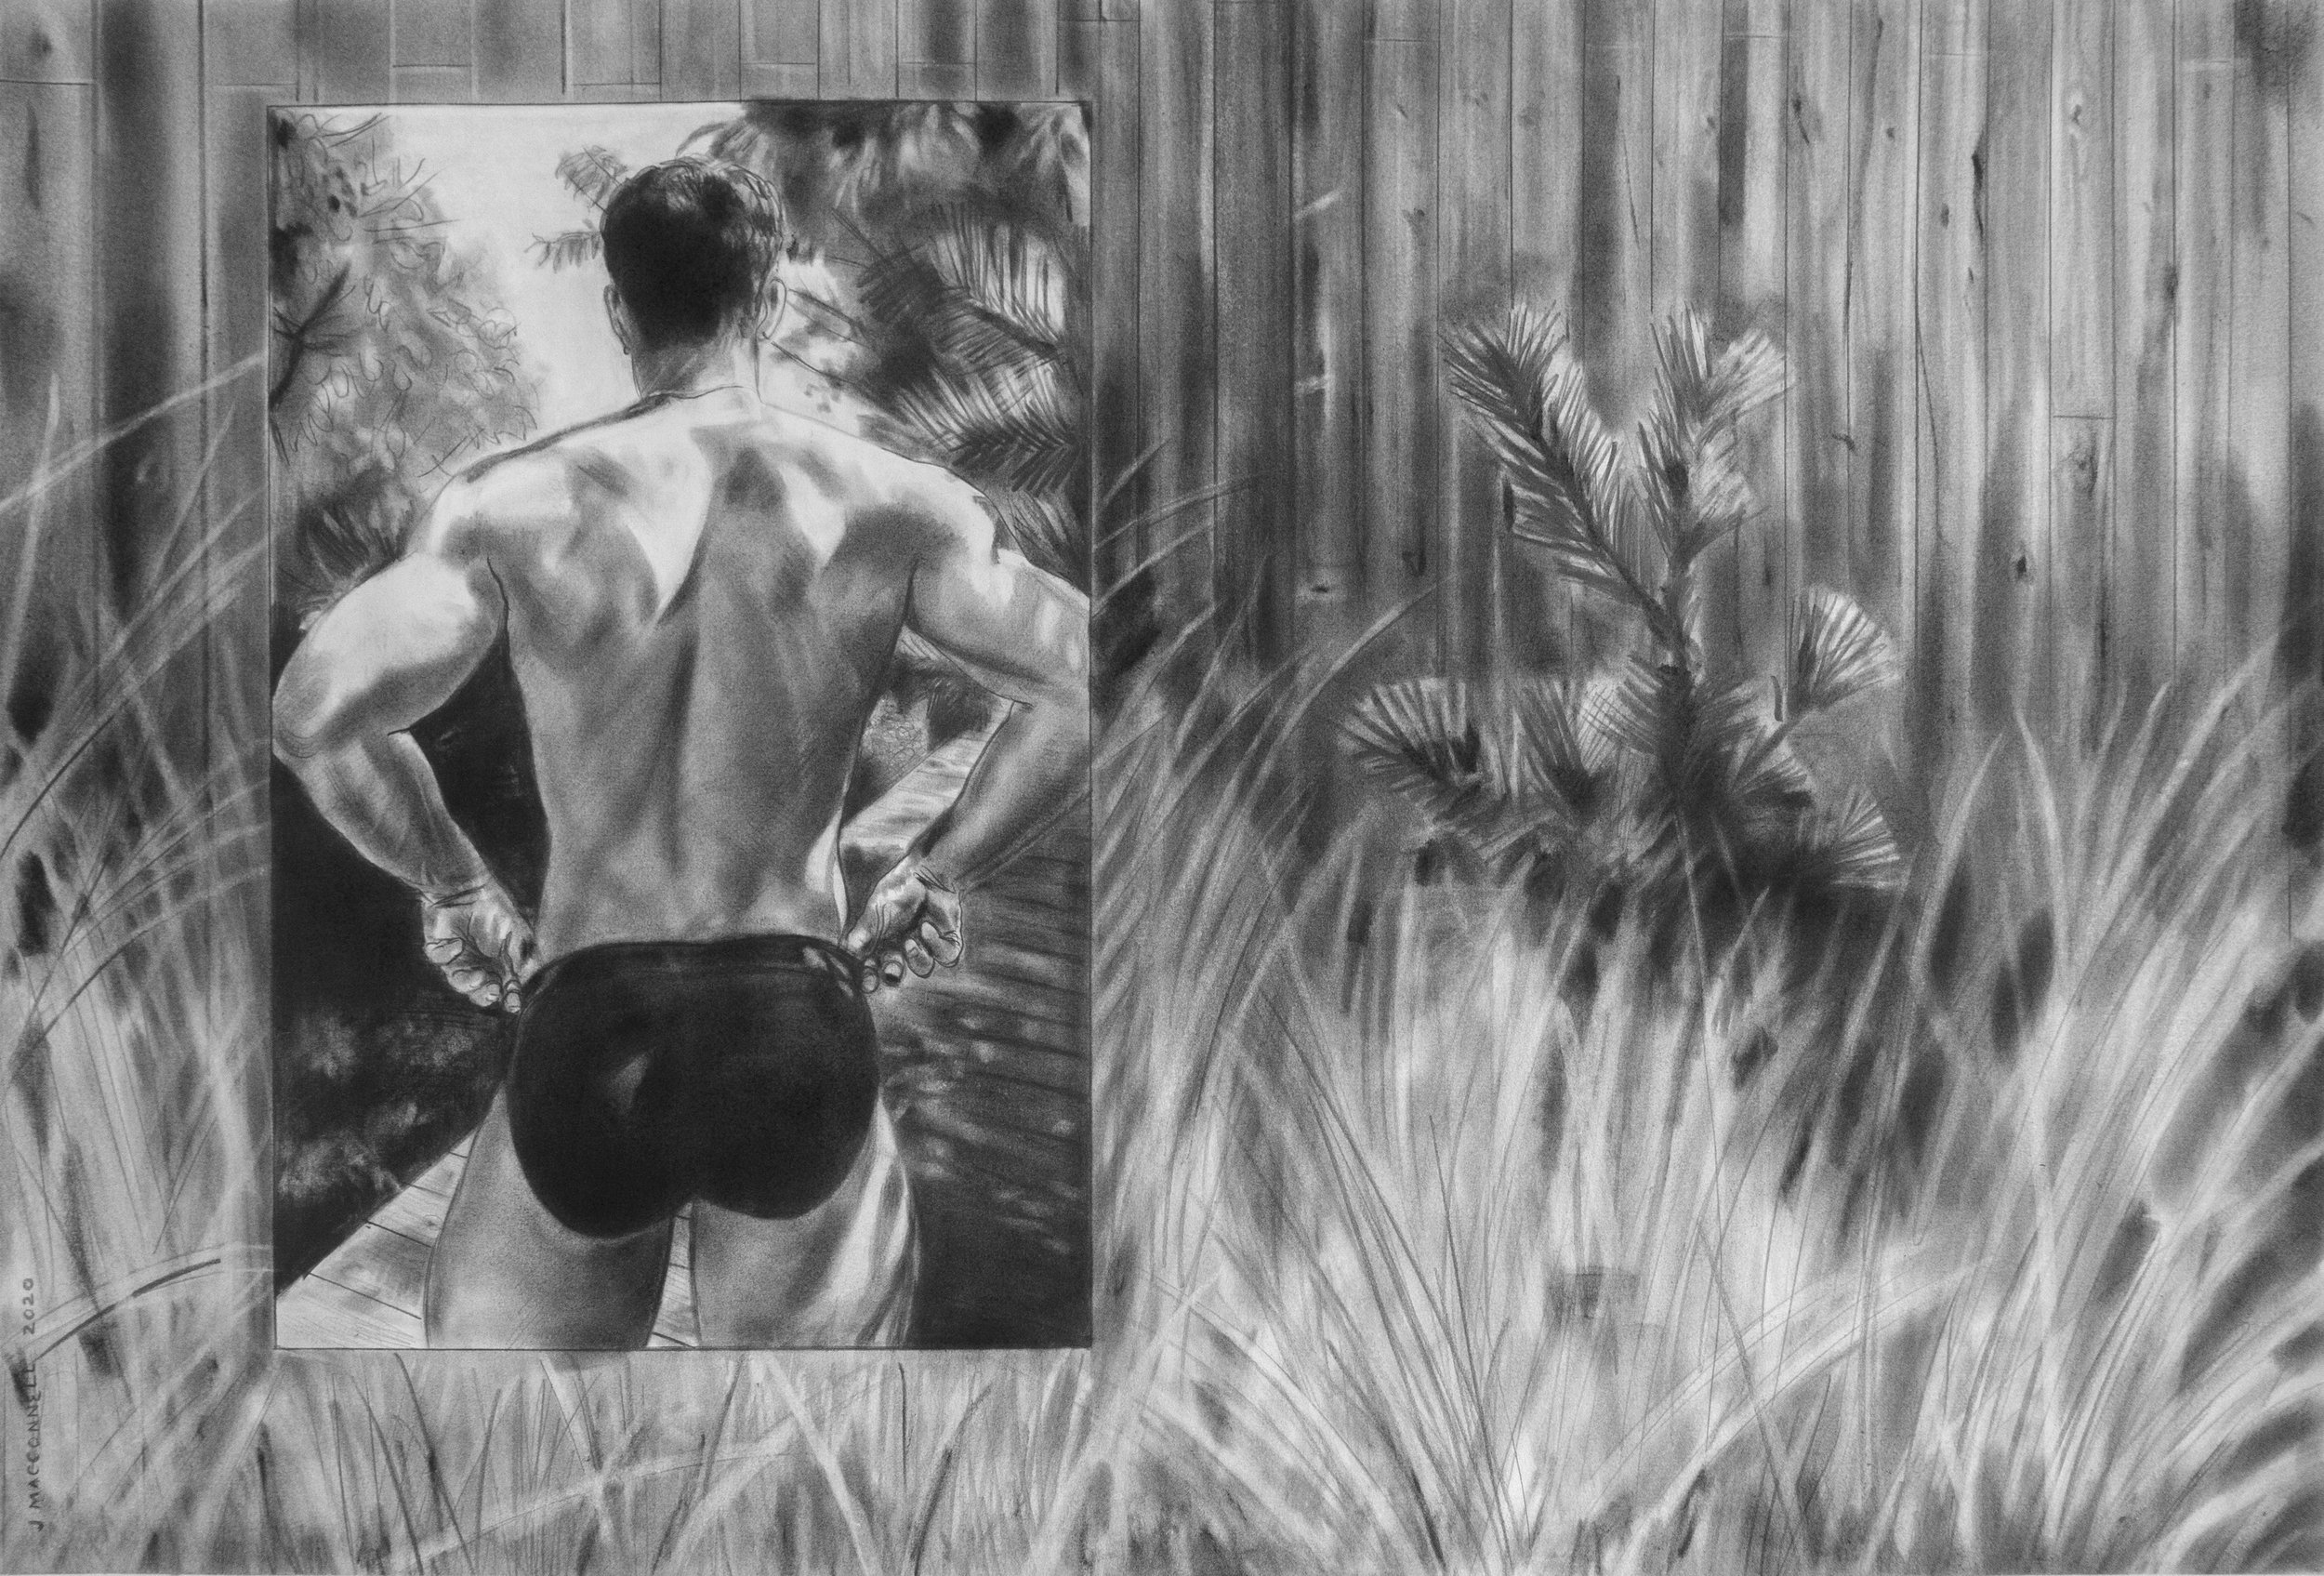   John MacConnell,  Patrick  (Fire Island 2), 2020, graphite on Rives BFK, 30"x42"   Inquire  